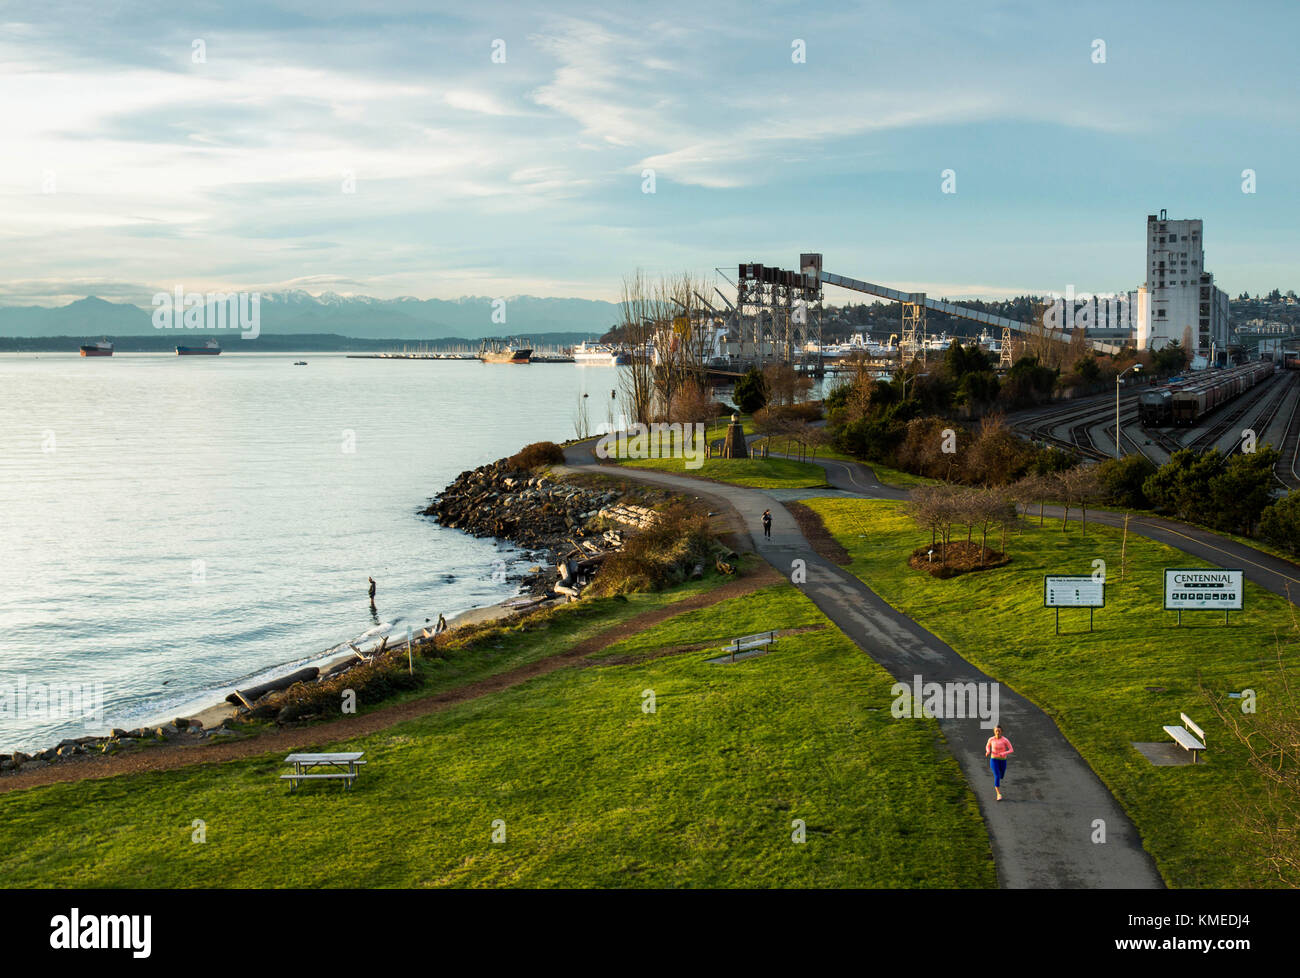 A runner jogs along the edge of the Puget Sound in Seattle, WA on a cloudy evening. Stock Photo